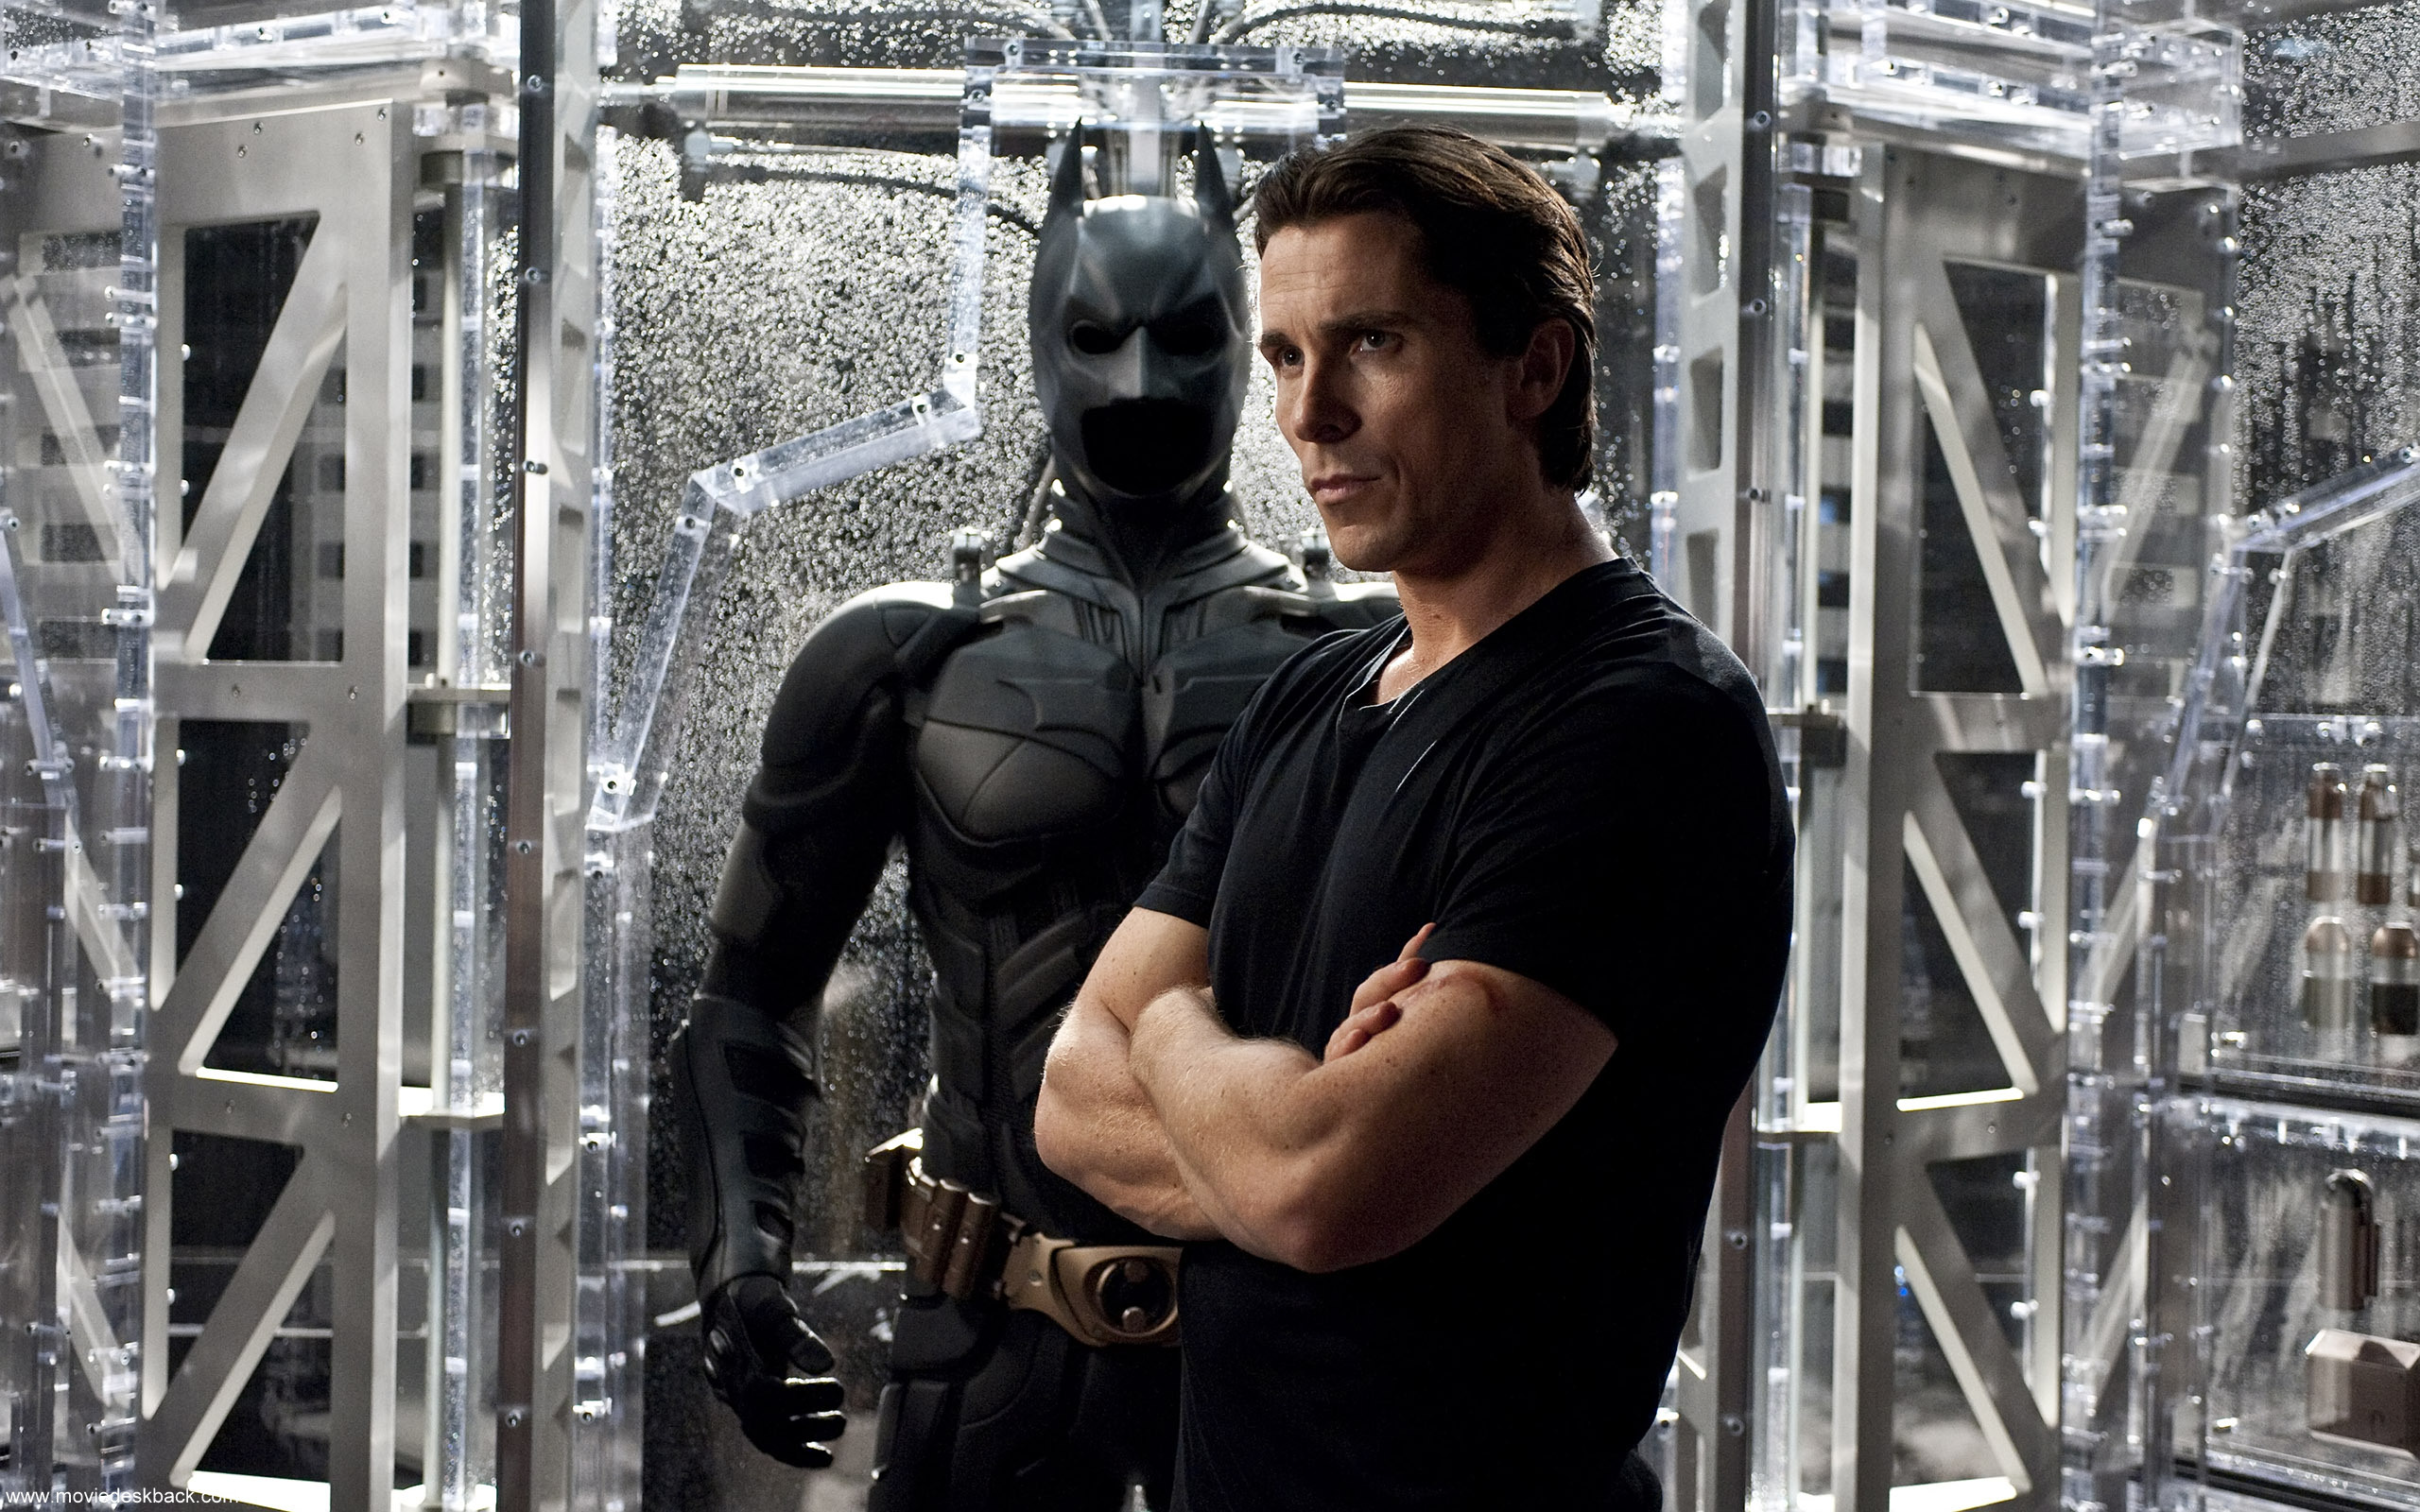 CHRISTIAN BALE as Bruce Wayne in Warner Bros. Pictures’ and Legendary Pictures’ action thriller “THE DARK KNIGHT RISES,” a Warner Bros. Pictures release. TM and © DC Comics